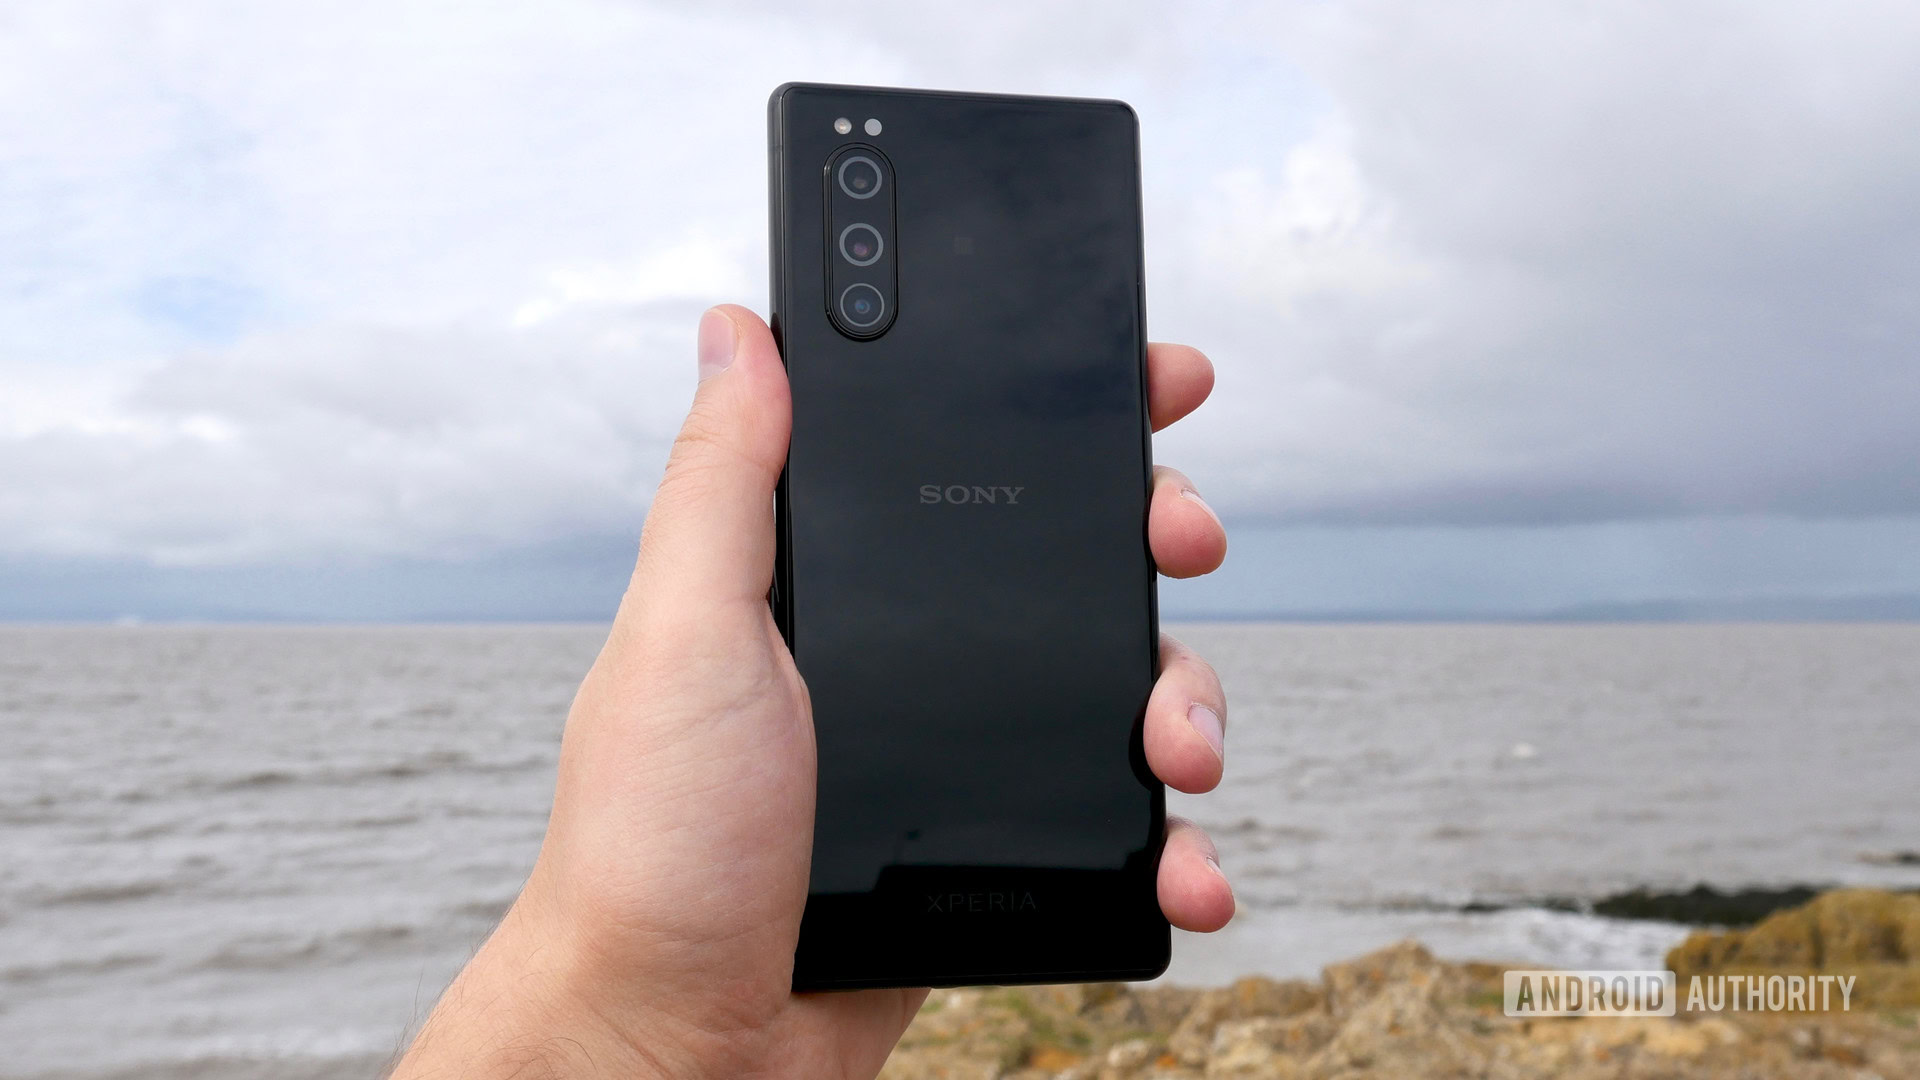 Sony Xperia 5 V review: Should you buy it? - Android Authority